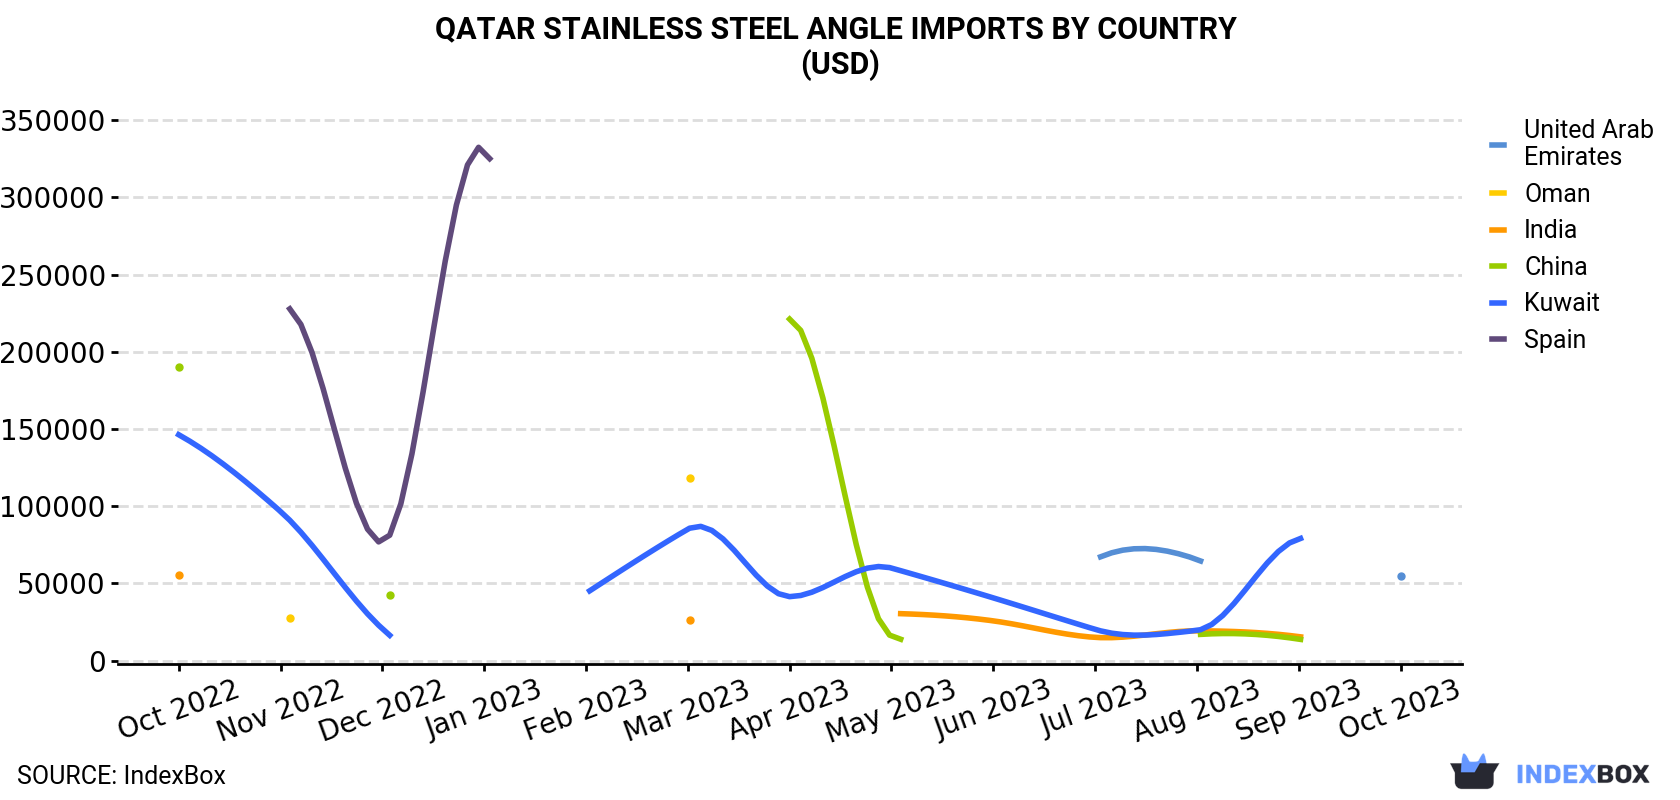 Qatar Stainless Steel Angle Imports By Country (USD)